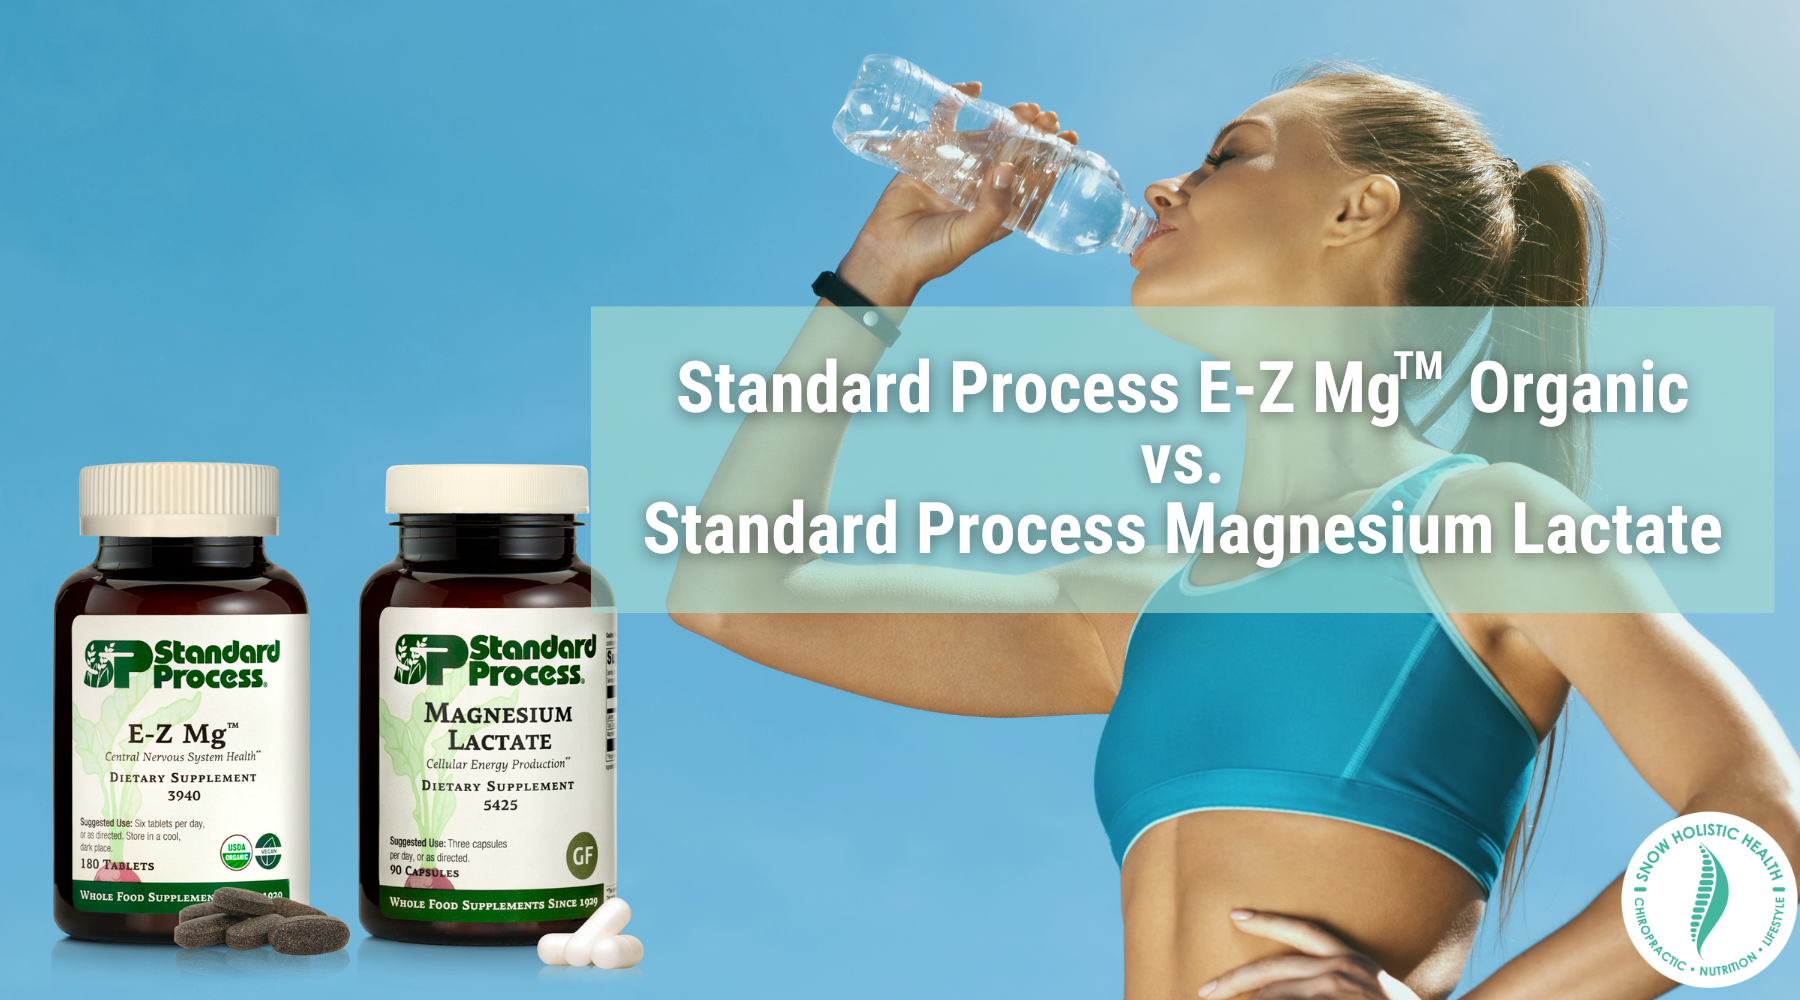 Image of woman in exercise gear drinking water with caption: "Standard Process E-Z Mg TM Organic vs. Standard Process Magnesium Lactate"